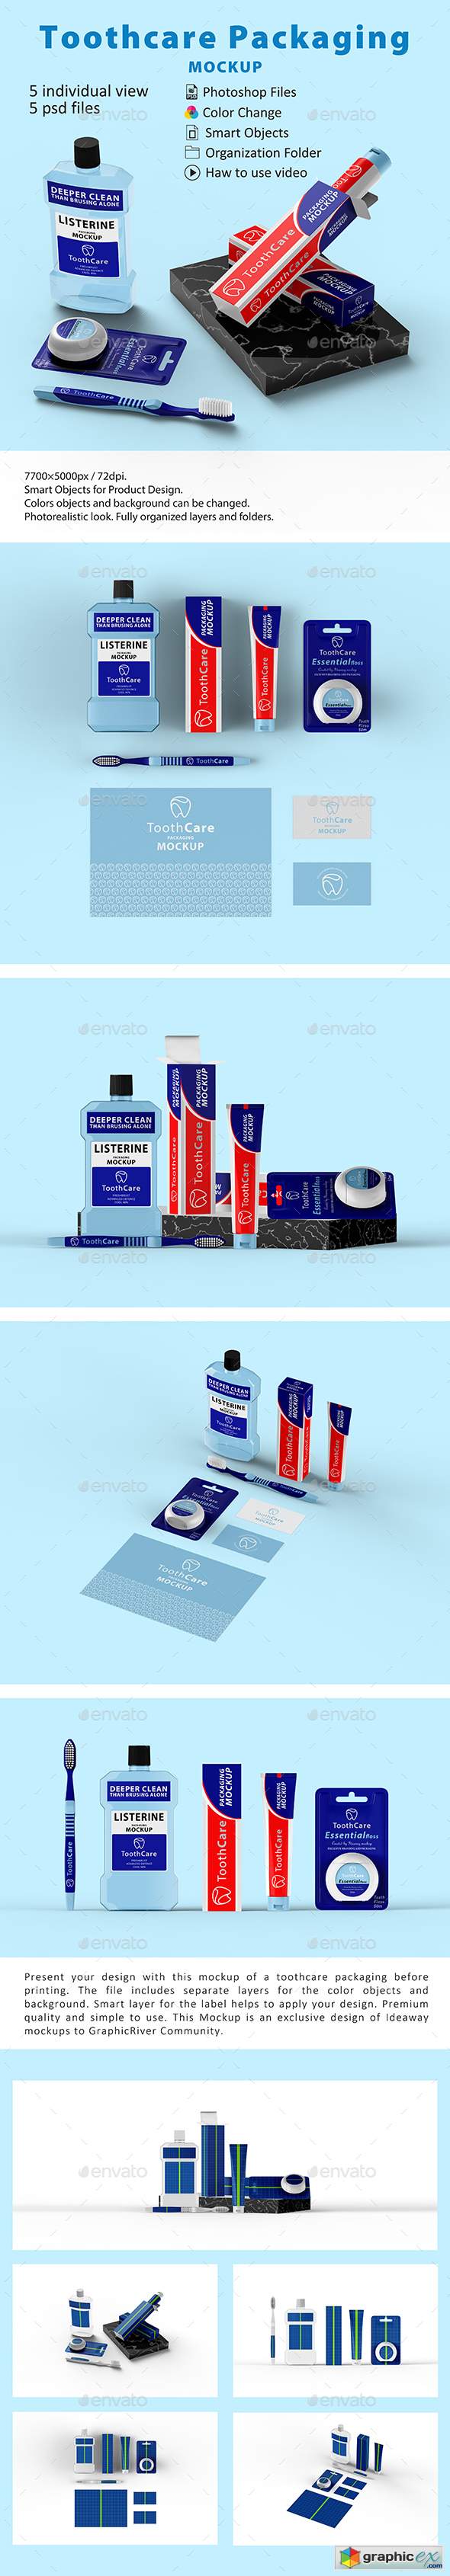 Toothcare Packaging Mockup